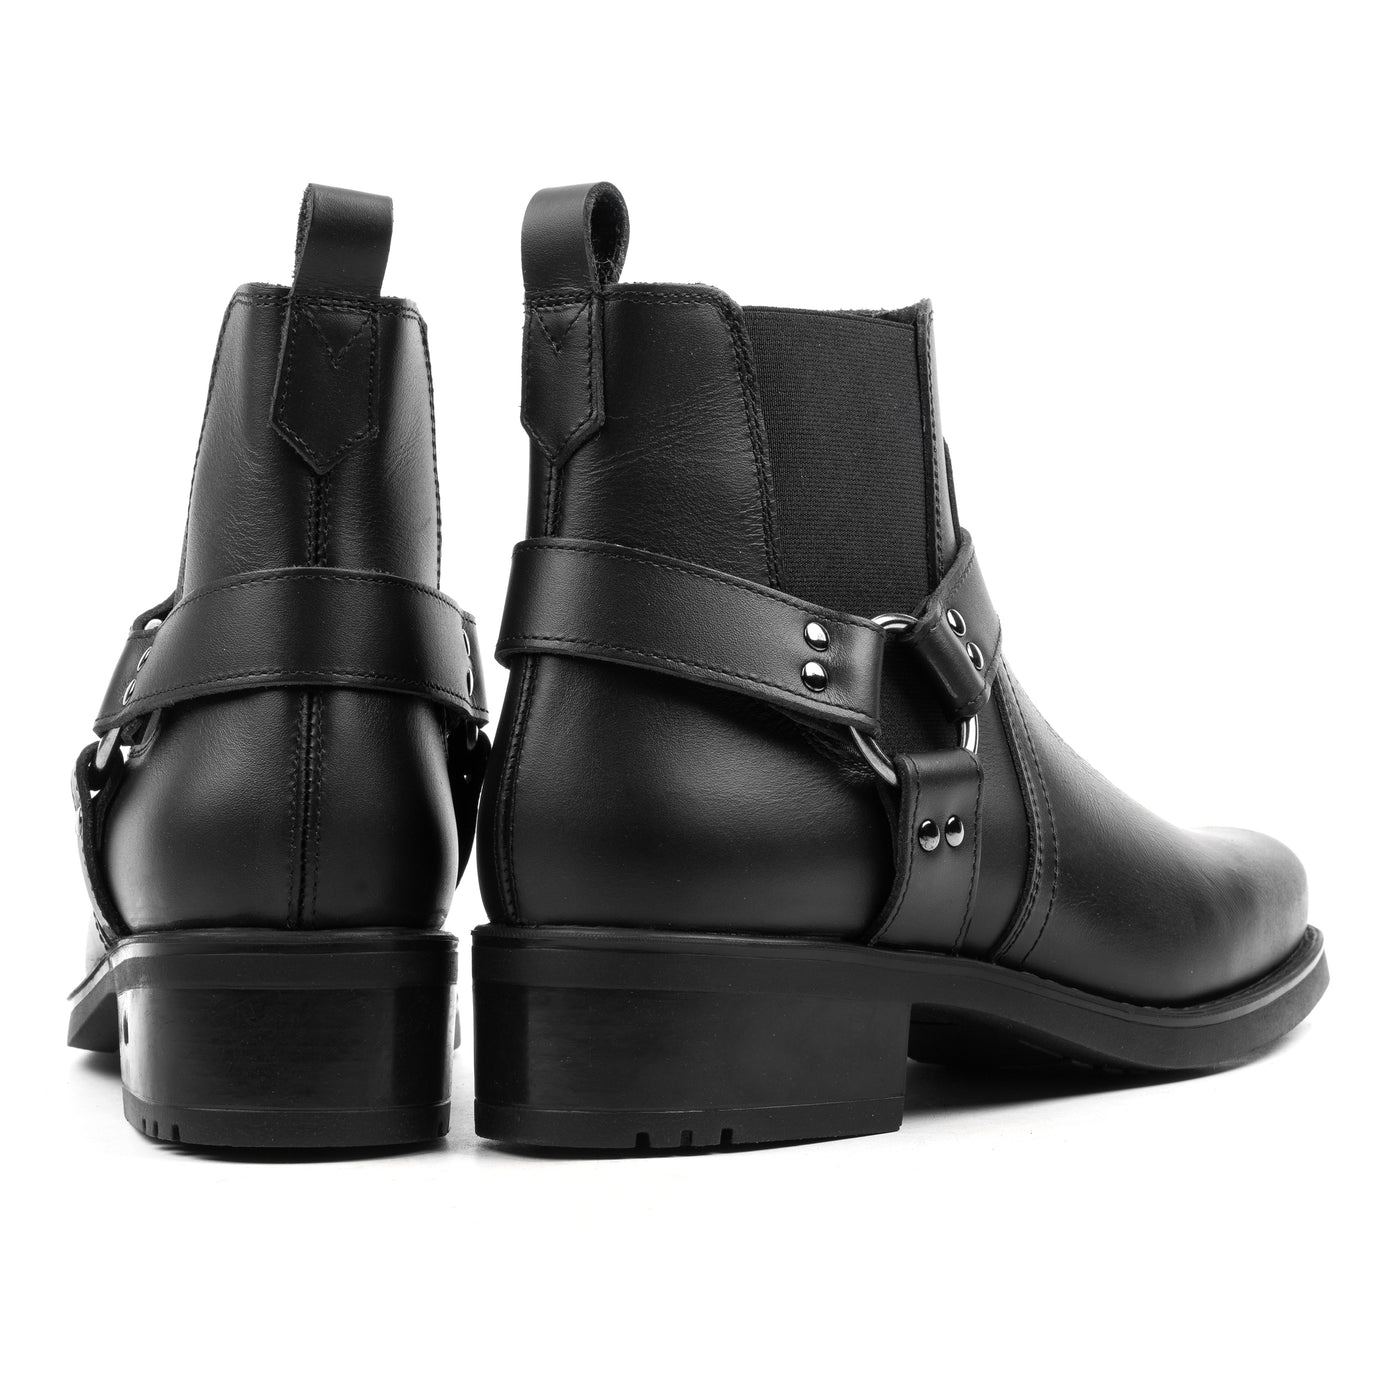 NORDLAND HARLEY ANKLE BOOT Black Leather - HINSON